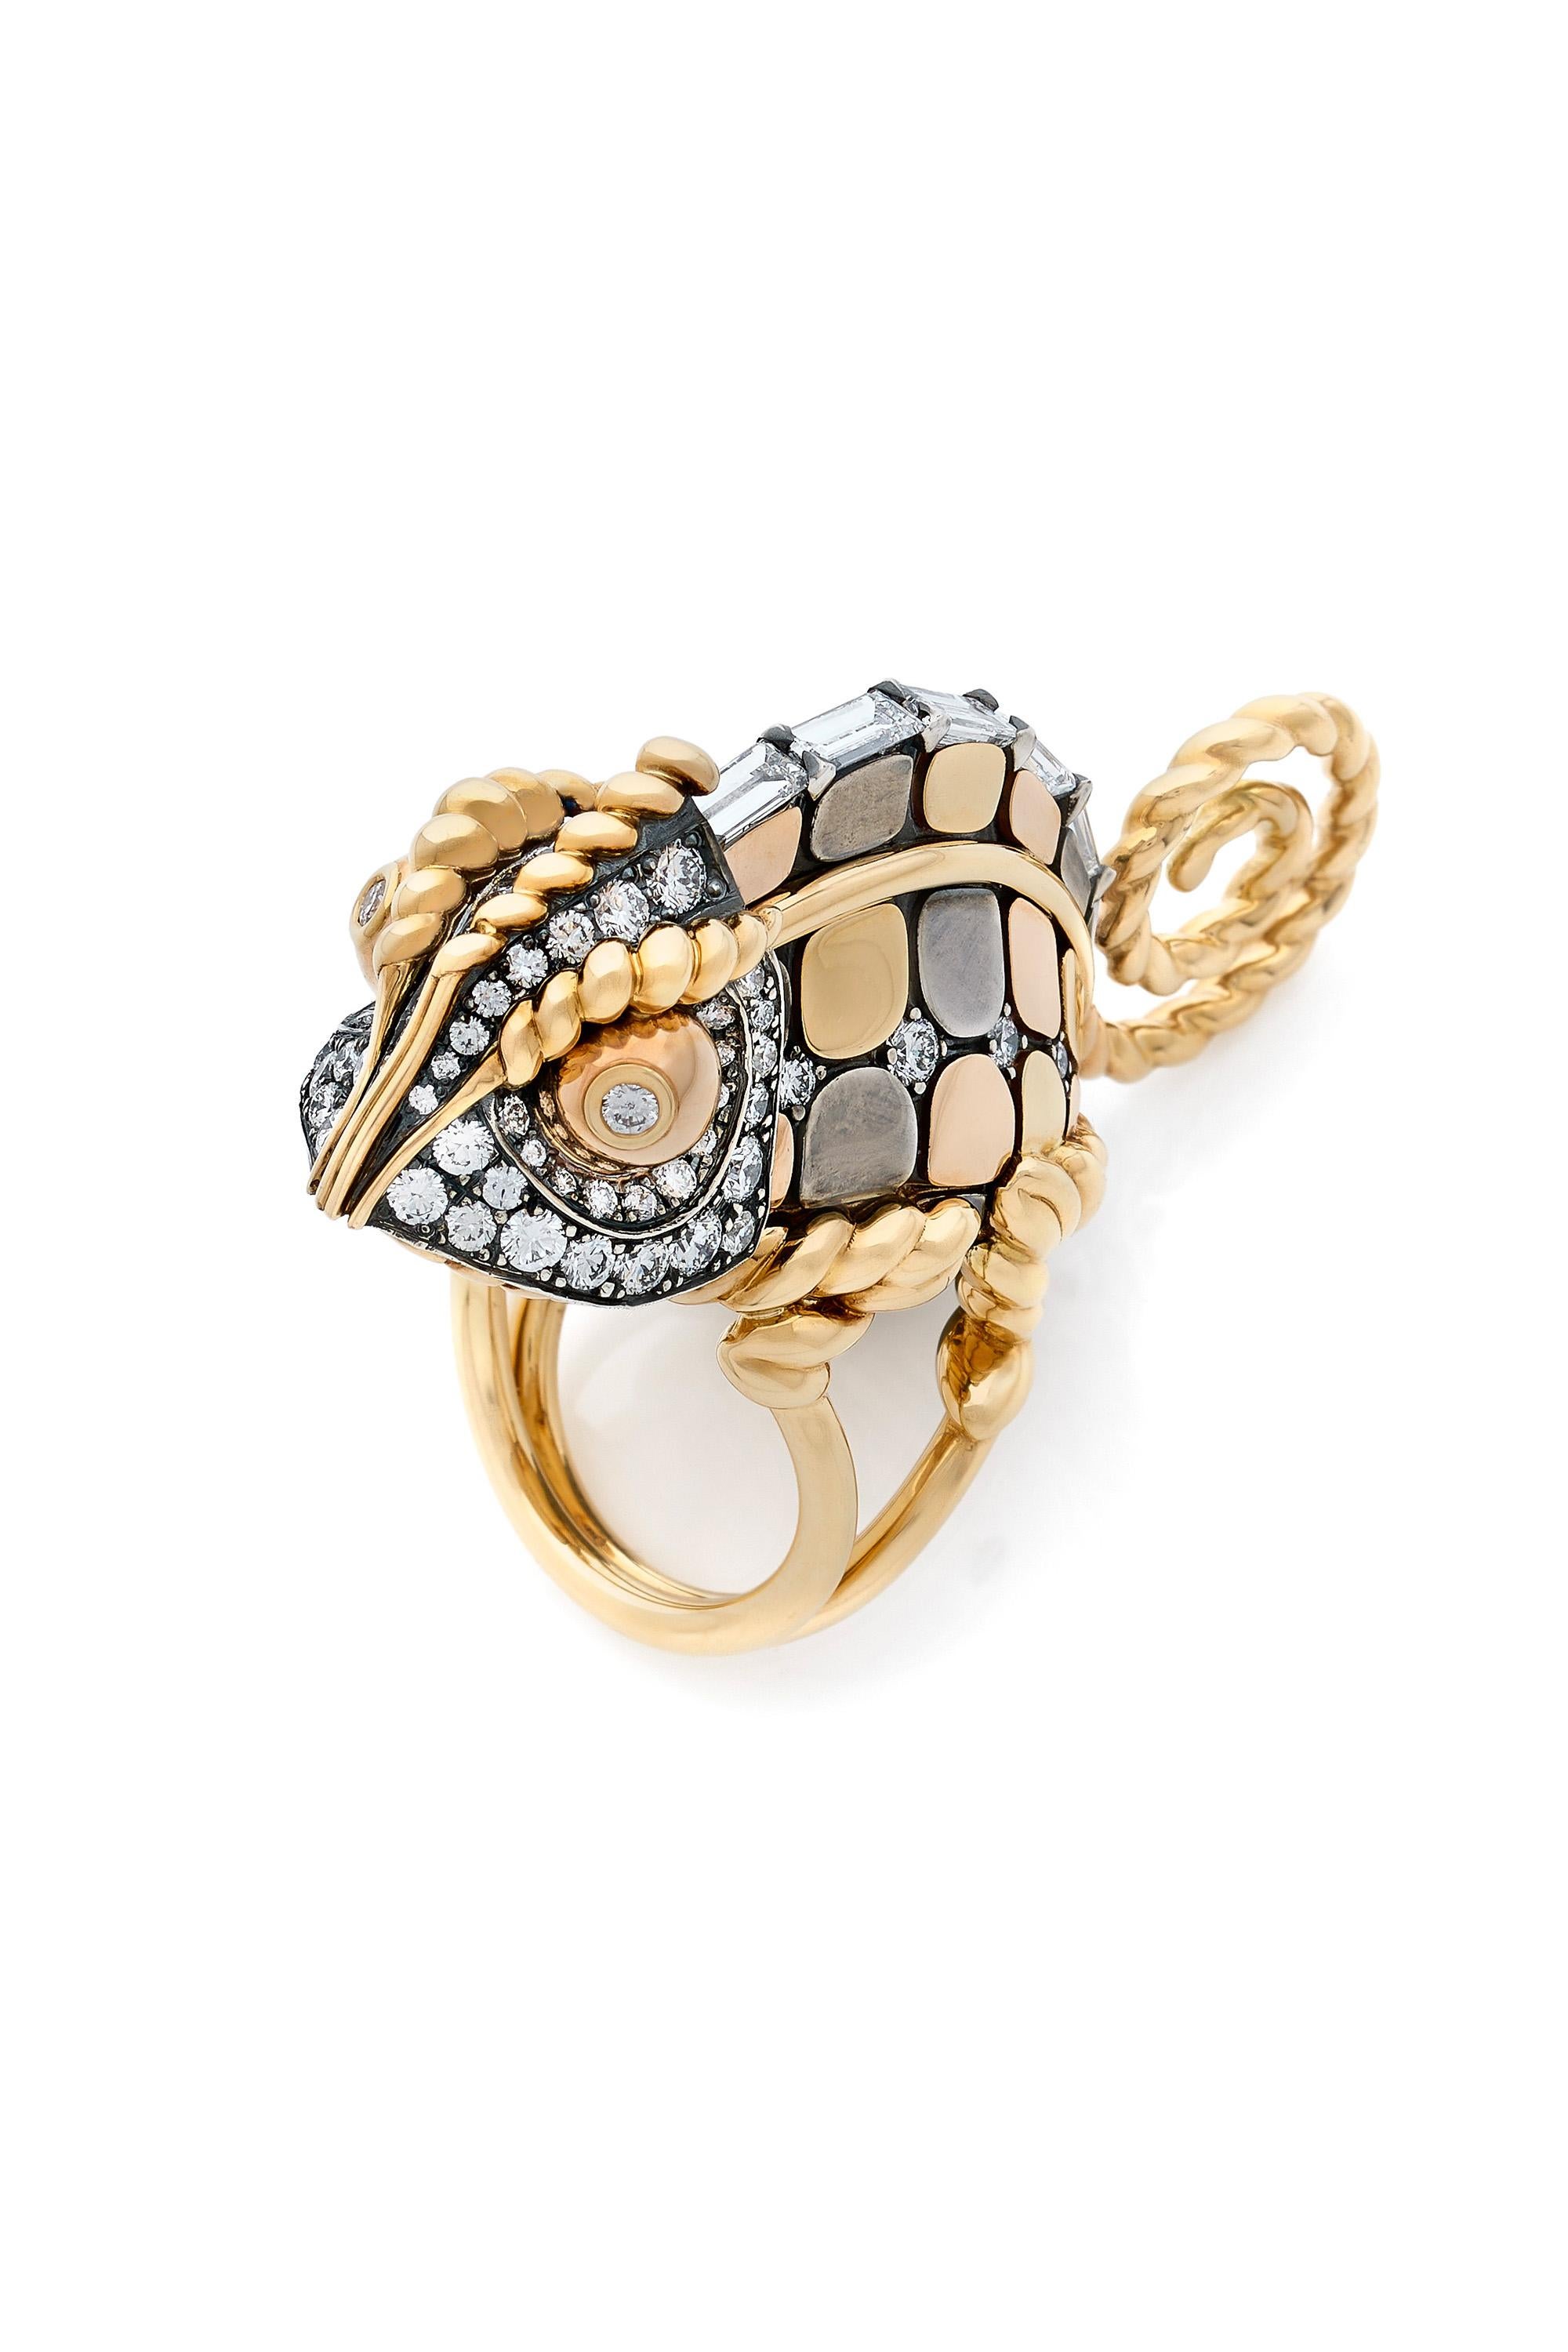 Yellow gold, rose gold and distressed silver ring. Yellow gold, rose gold or distressed silver scales, set with diamonds, and a yellow gold wire. The chameleon's head, encrusted with diamonds, is articulated.

Details:
Diamonds: 2.8 cts
18k Yellow